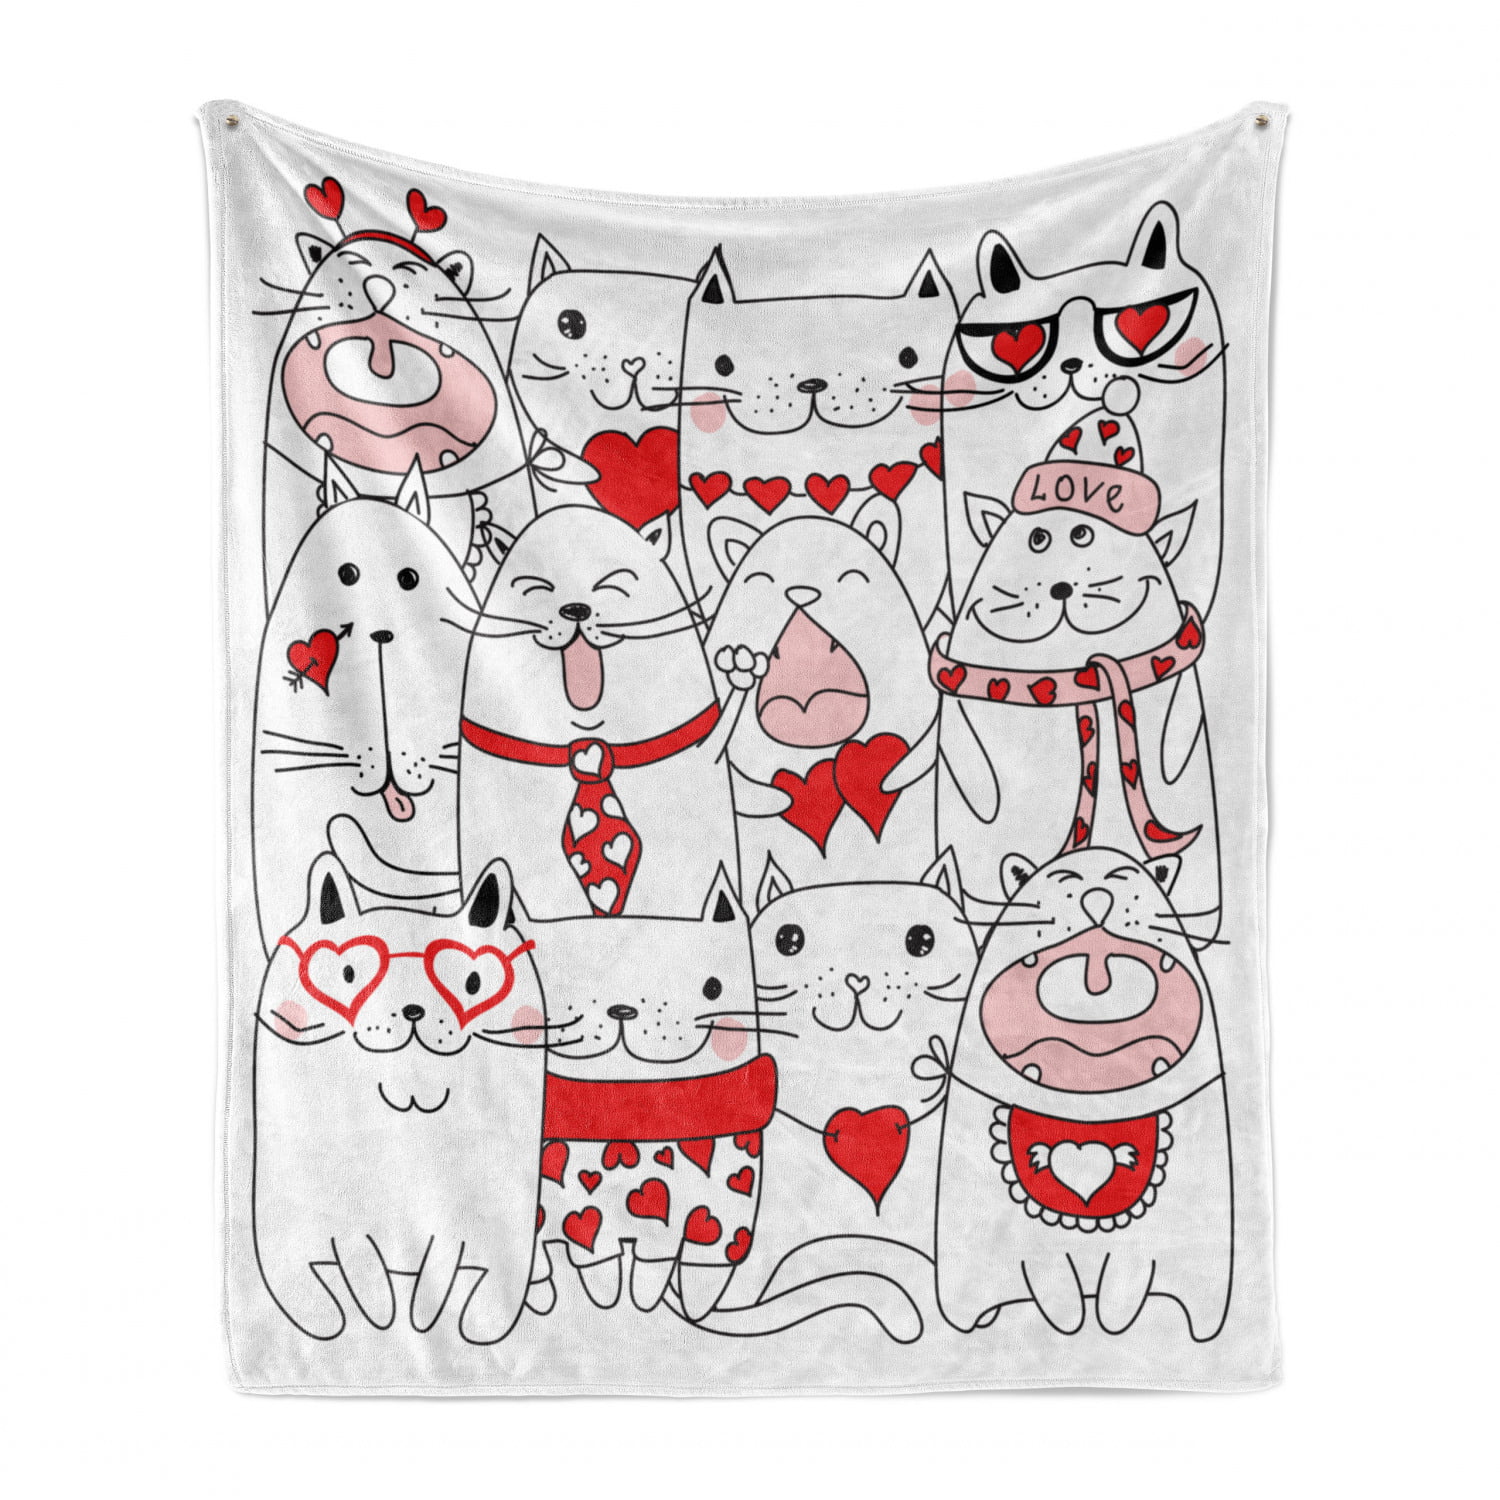 Cozy Plush for Indoor and Outdoor Use Charcoal Grey and Vermilion Ambesonne Paw Print Soft Flannel Fleece Throw Blanket I Love Animals Dogs and Cats Themed Classic Graphic with Heart 60 x 80 